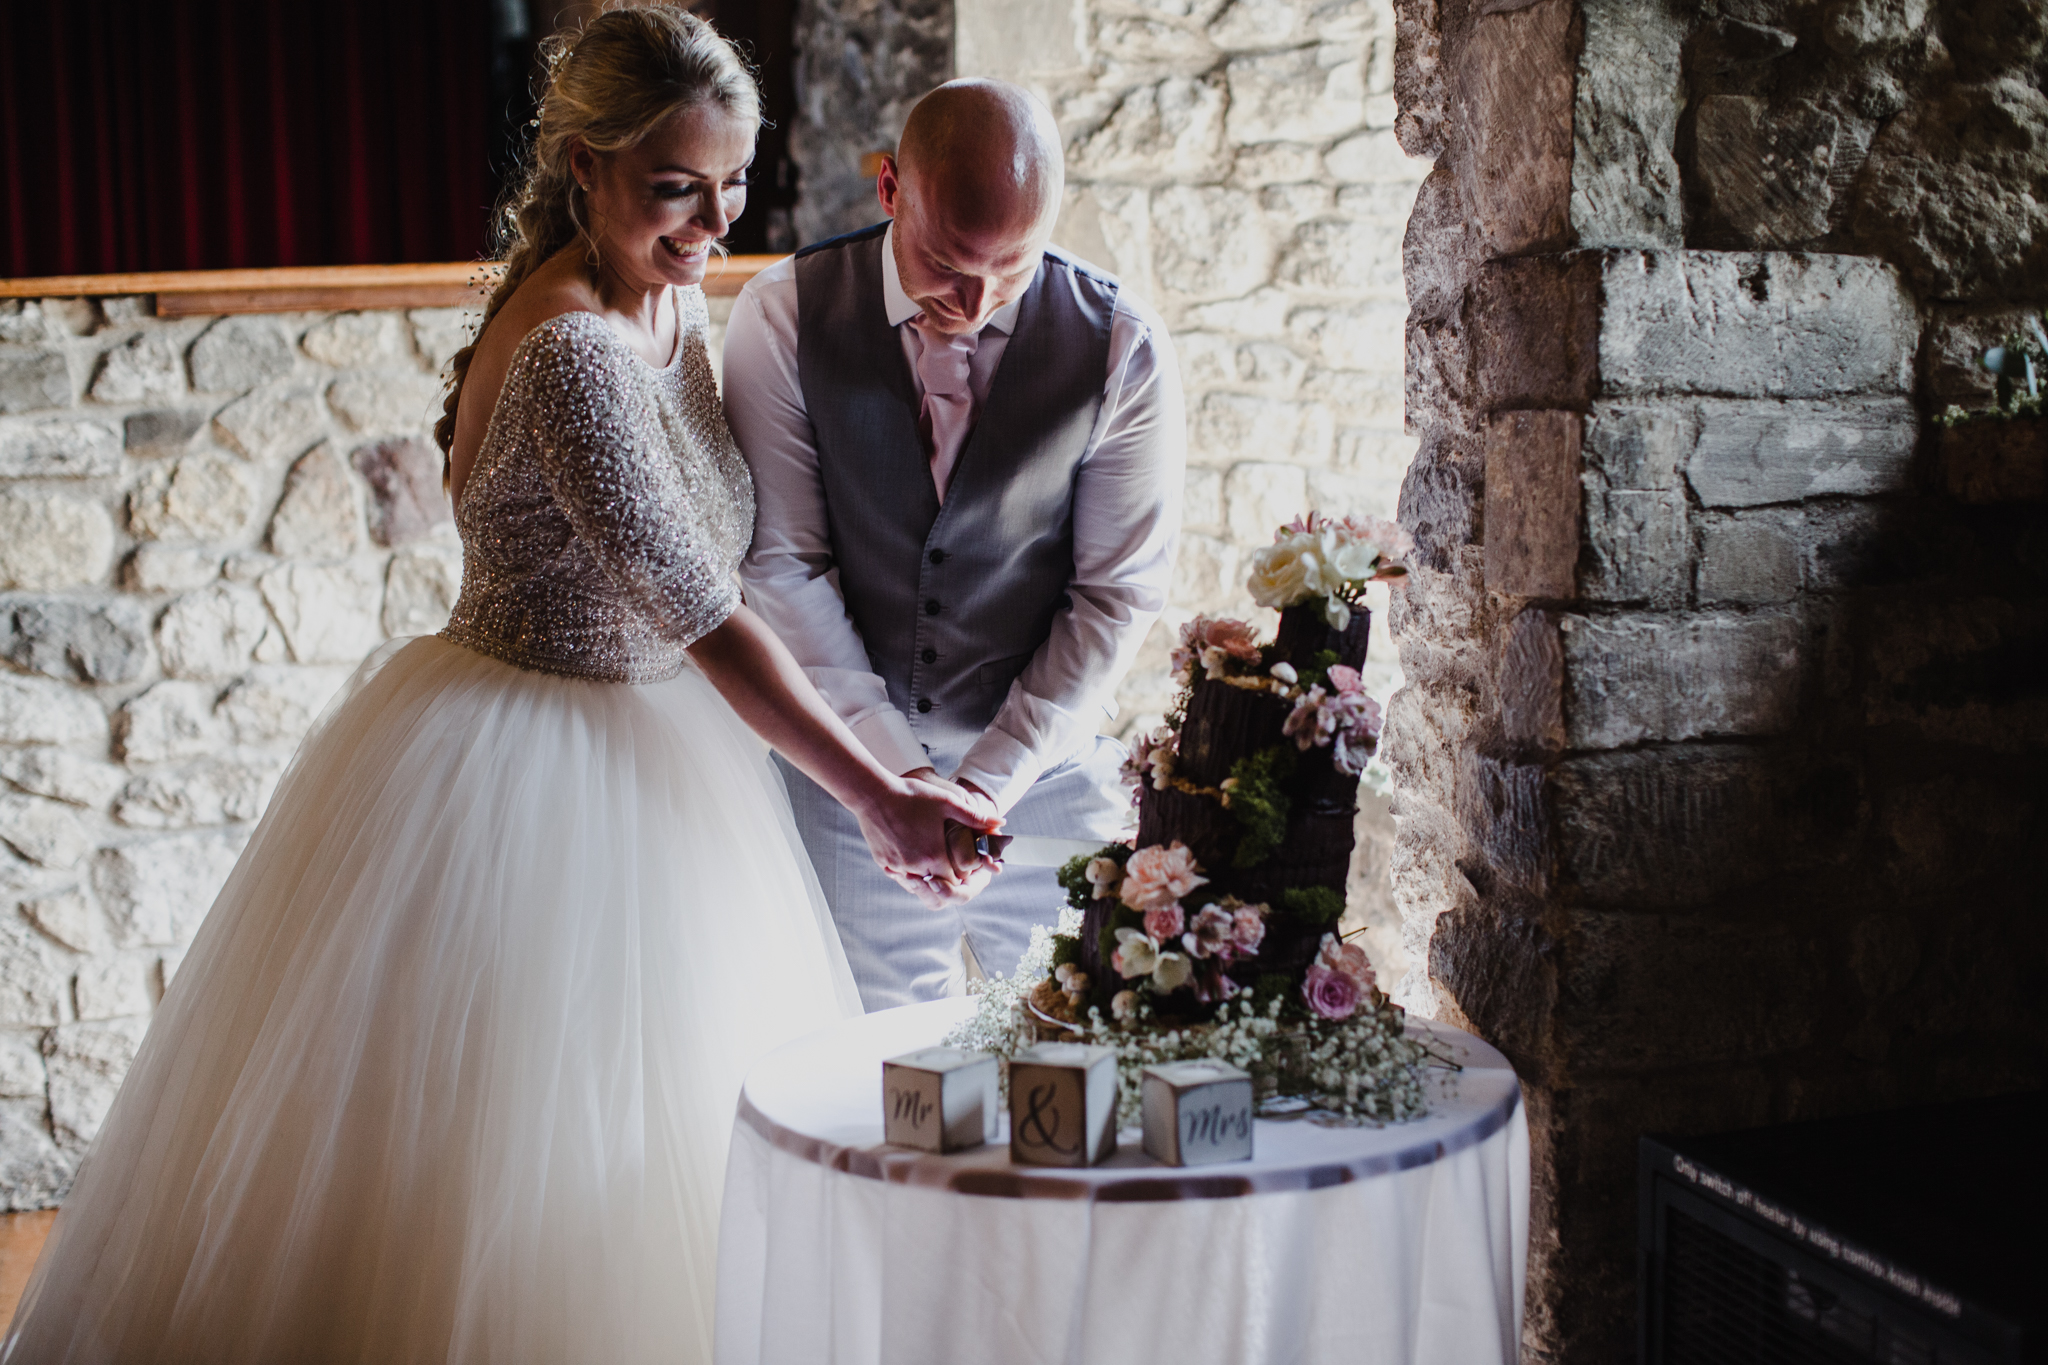 bride and groom cutting cake in window light